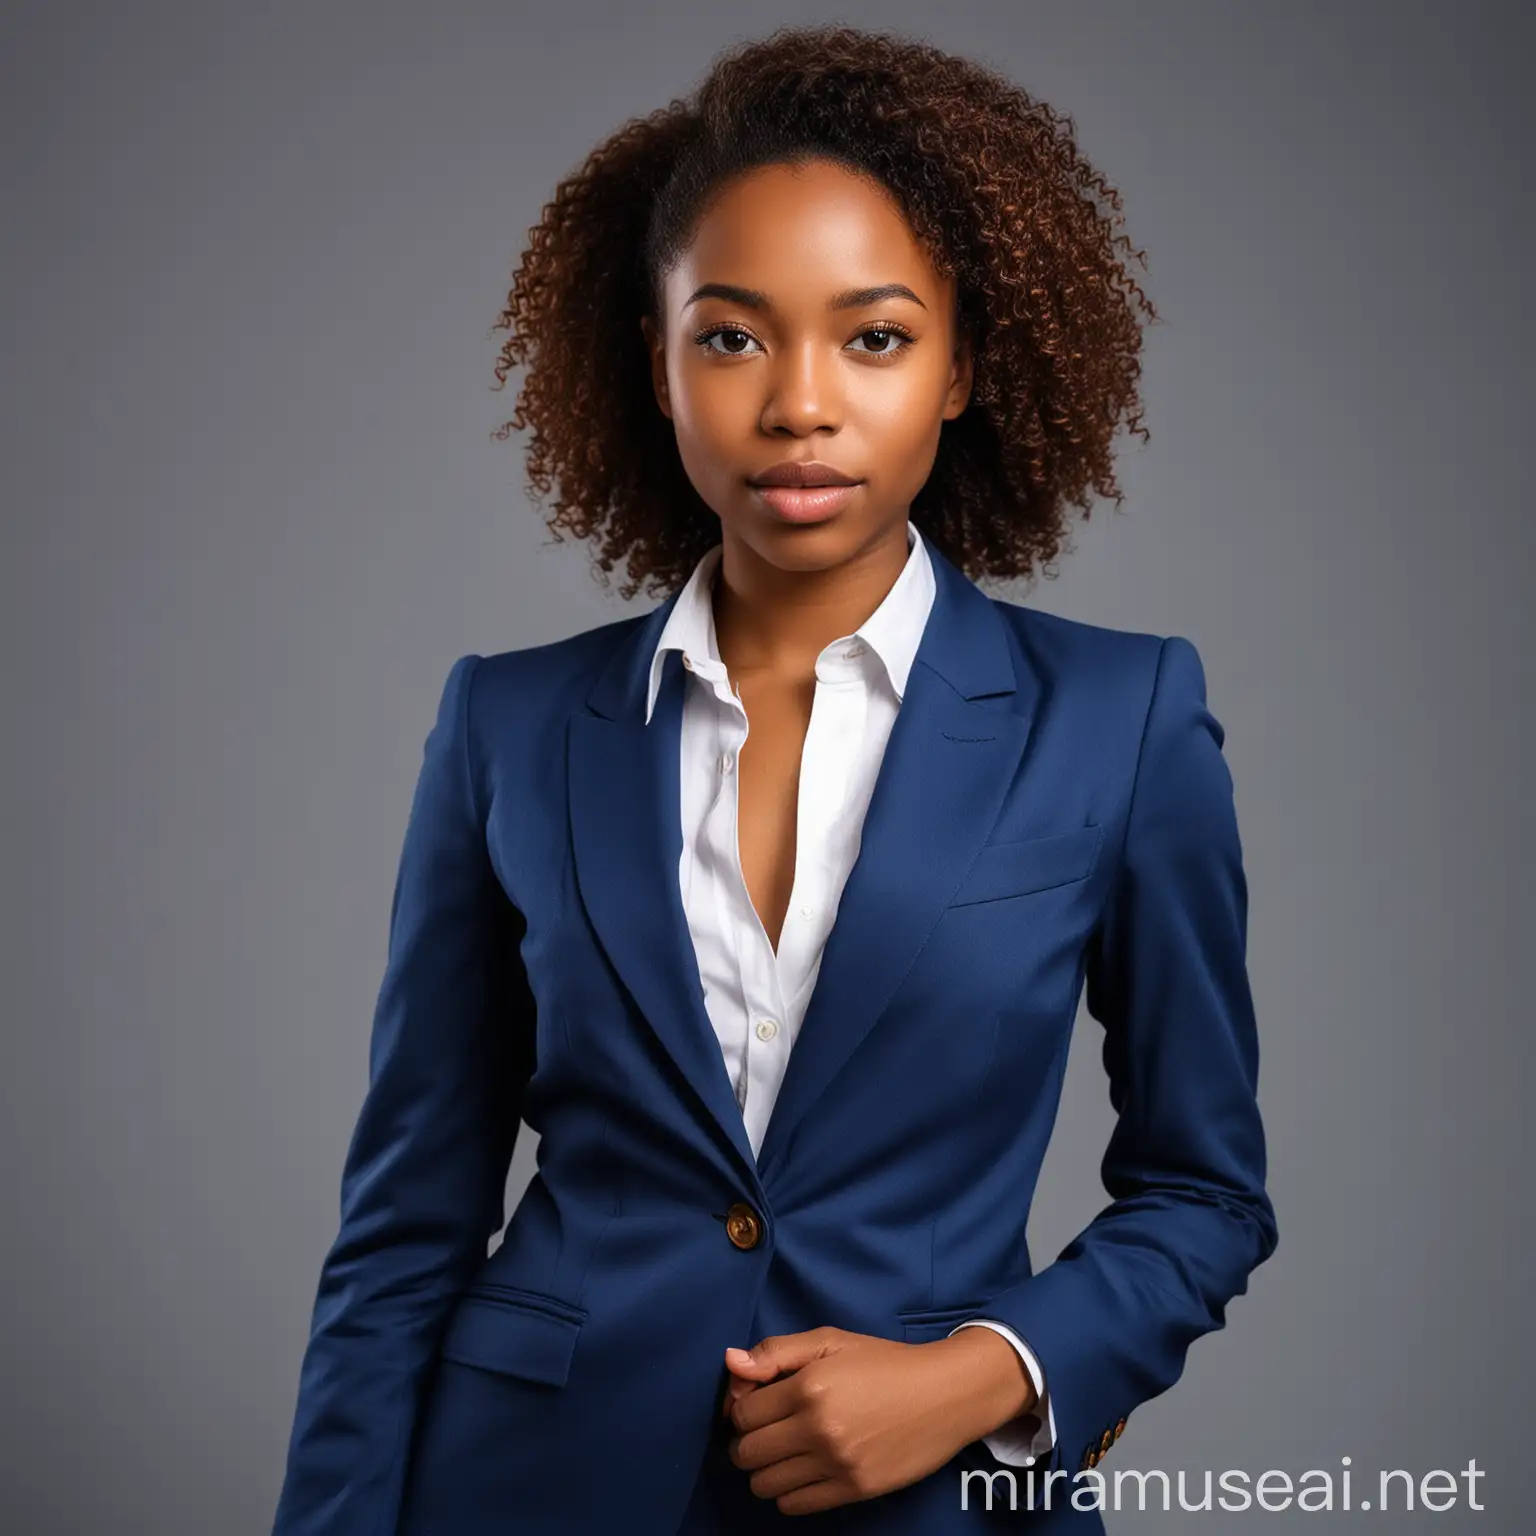 PICTURE OF A PROFESSIONAL AFRICA BROWN SKIN YOUNG LADY IN BLUE SUIT